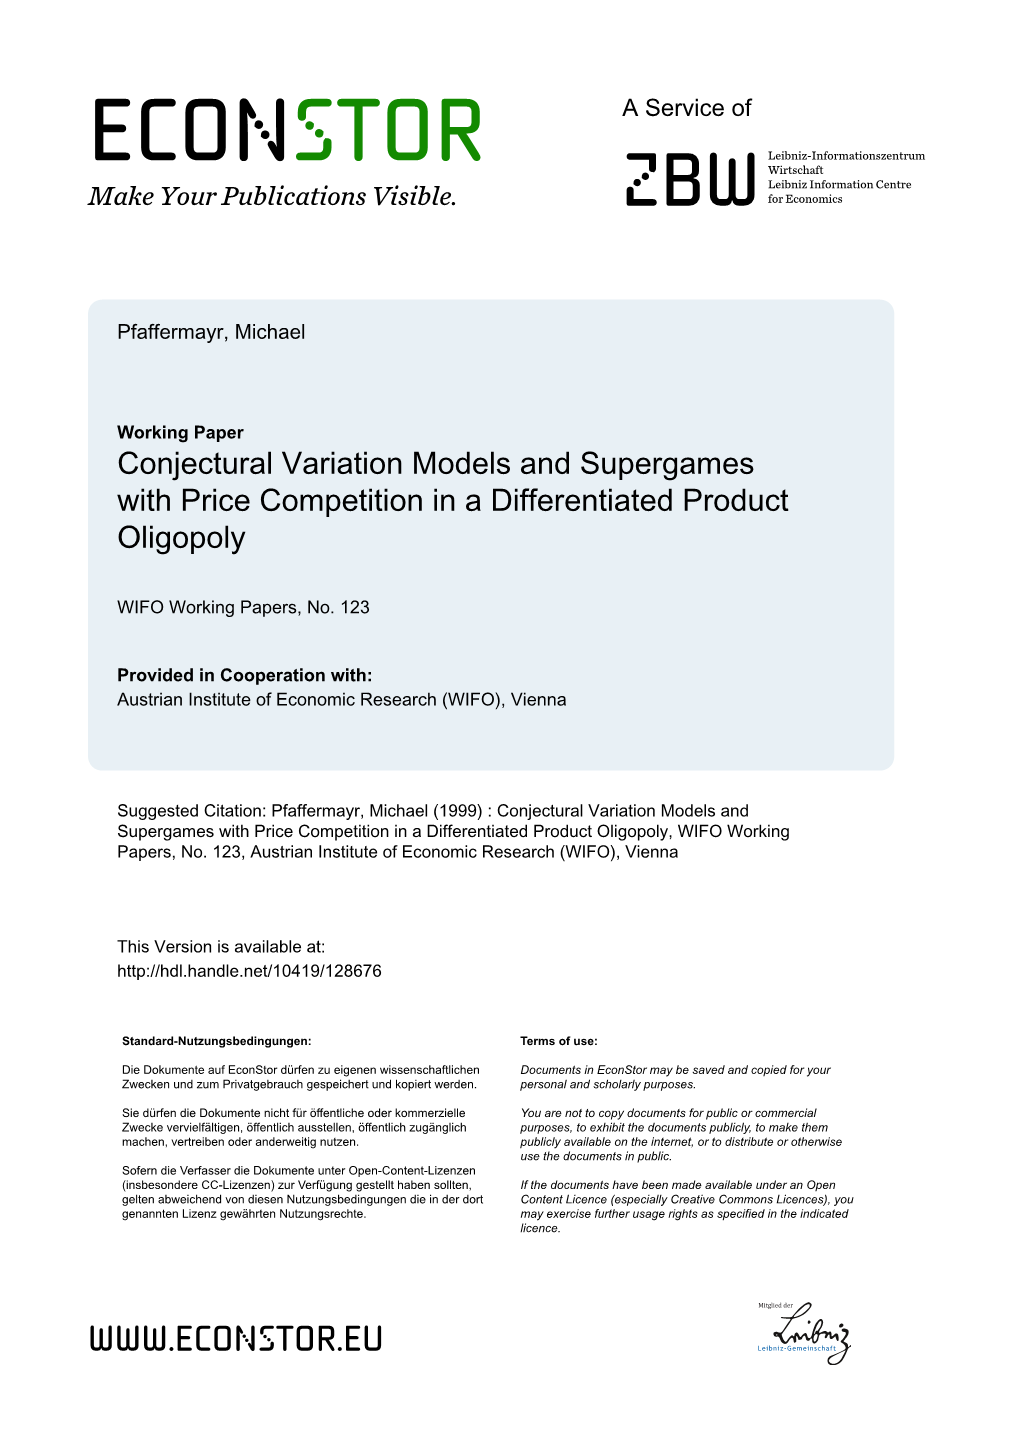 Conjectural Variation Models and Supergames with Price Competition in a Differentiated Product Oligopoly